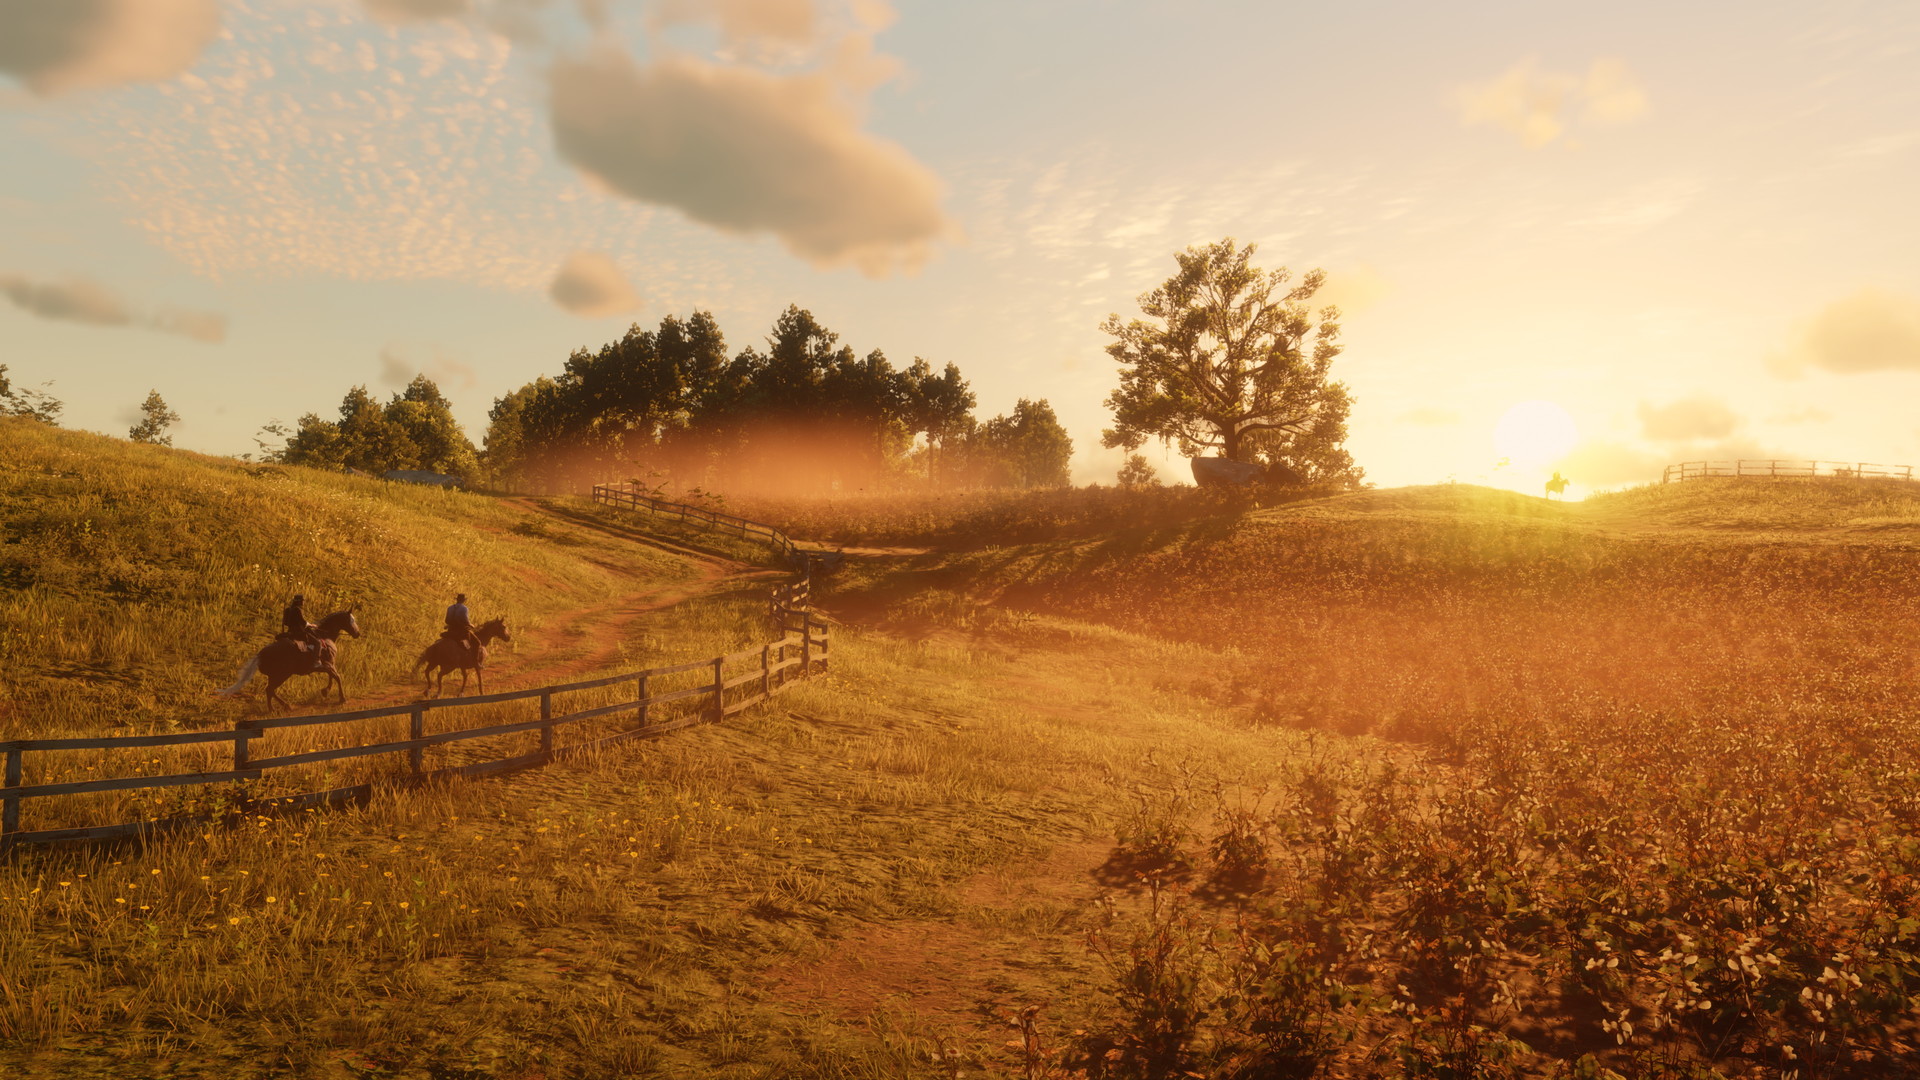 The old west countryside.